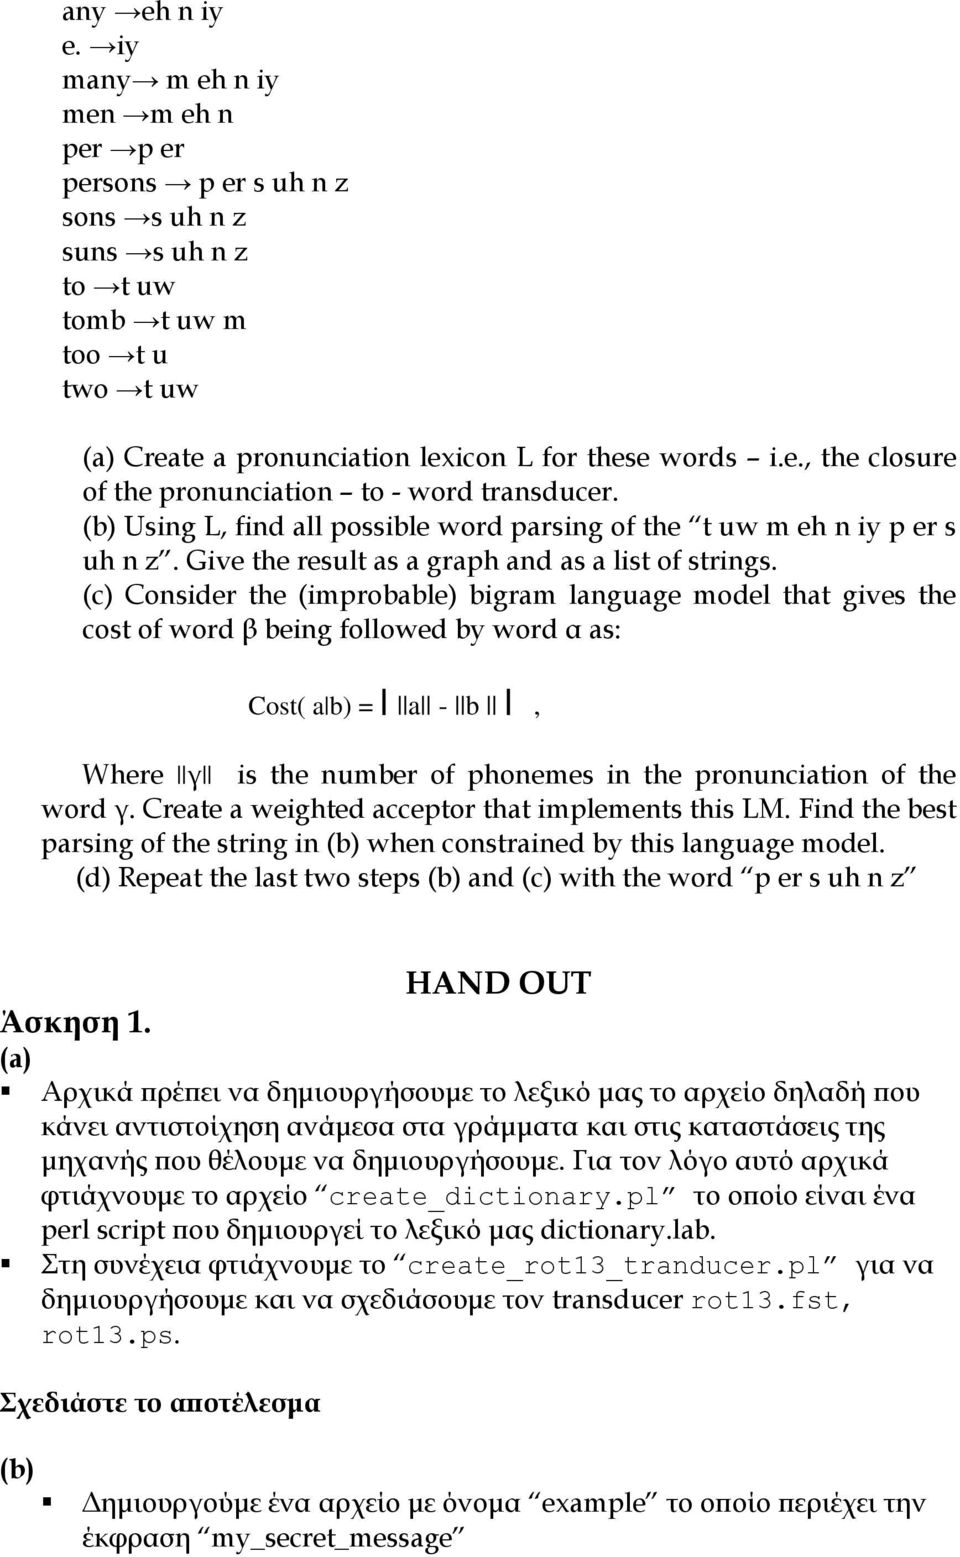 (c) Consider the (improbable) bigram language model that gives the cost of word β being followed by word α as: Cost( a b) = a - b, Where γ is the number of phonemes in the pronunciation of the word γ.